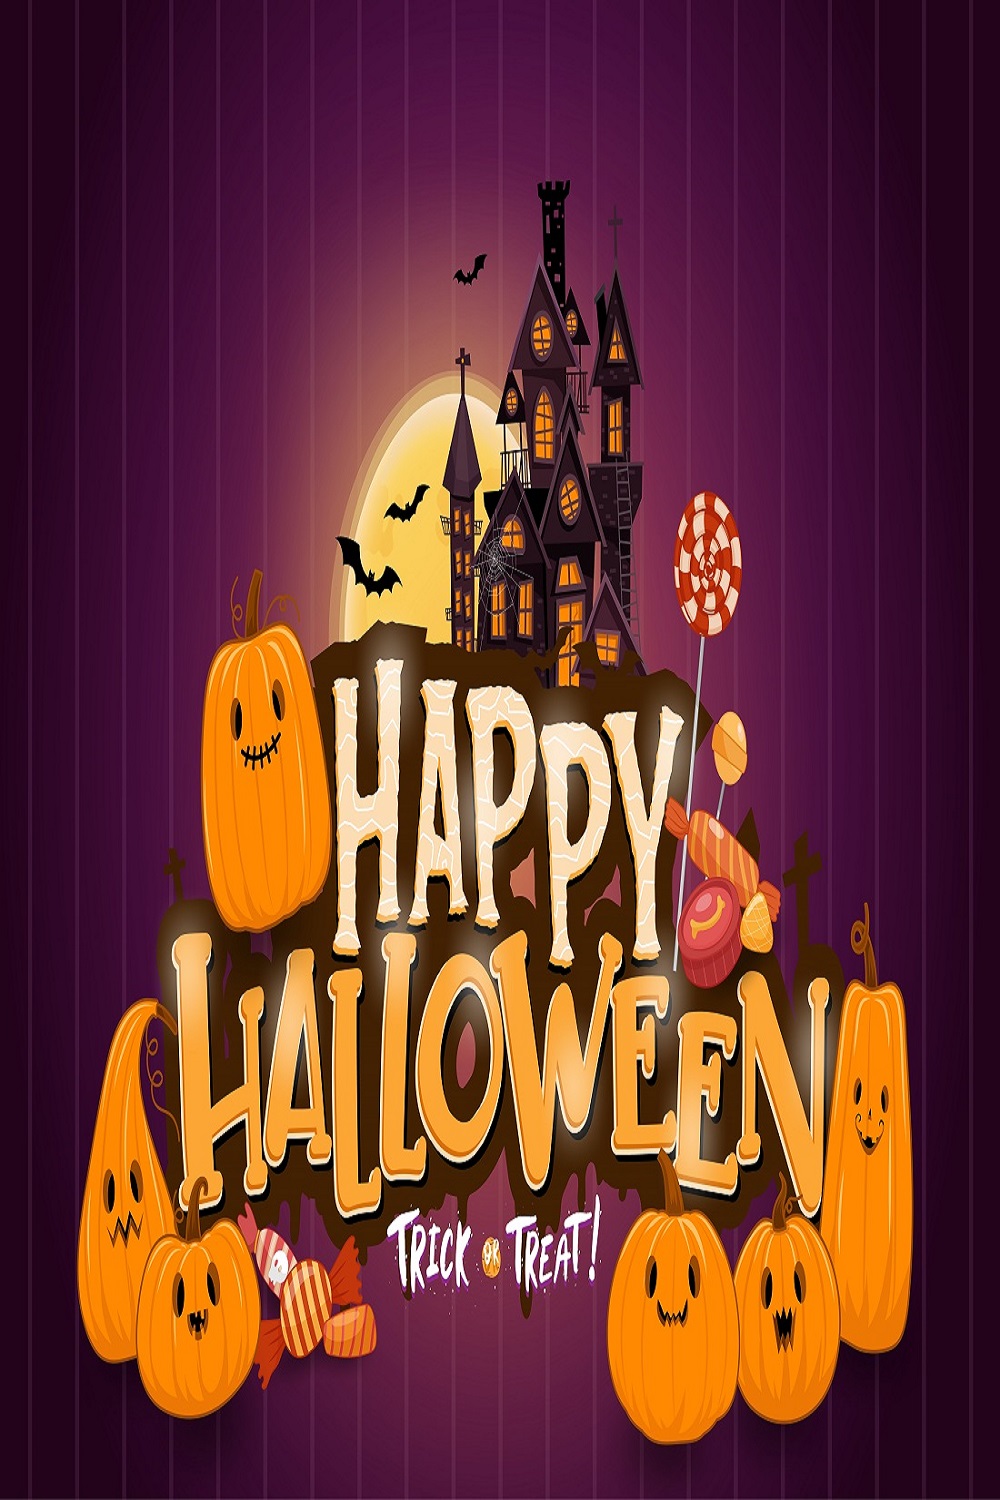 Happy Halloween background template darkness pinterest preview image.